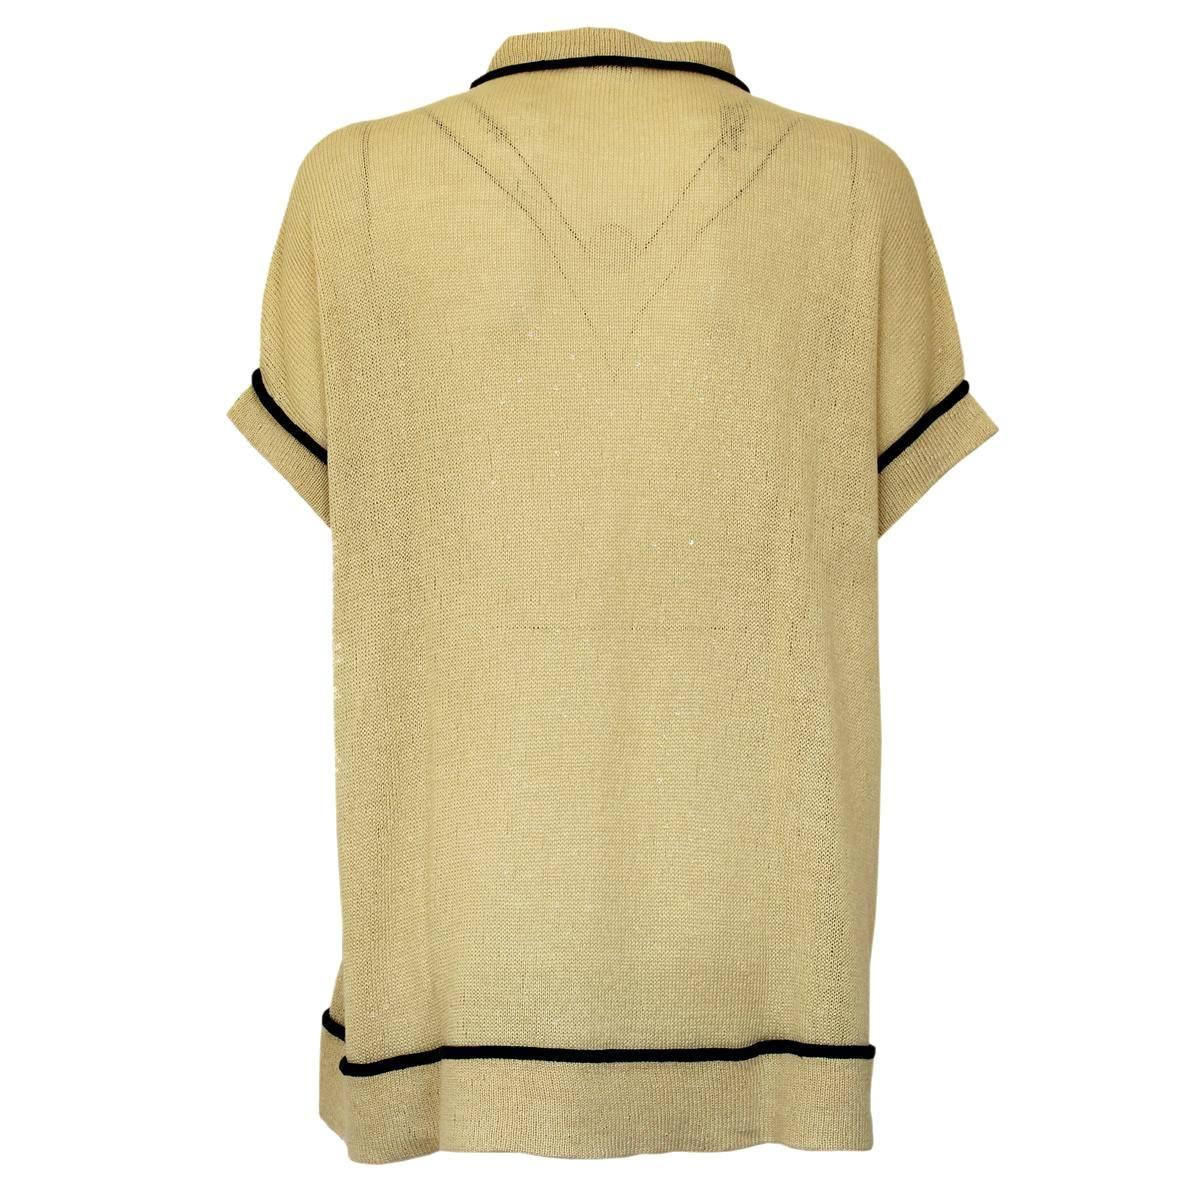 Linen (75%) and silk
Beige color
Short sleeves
Wide shoulder
Lenght from shoulder cm 62 (24.4 inches)
Over fit
Made in Italy
Worldwide express shipping included in the price !